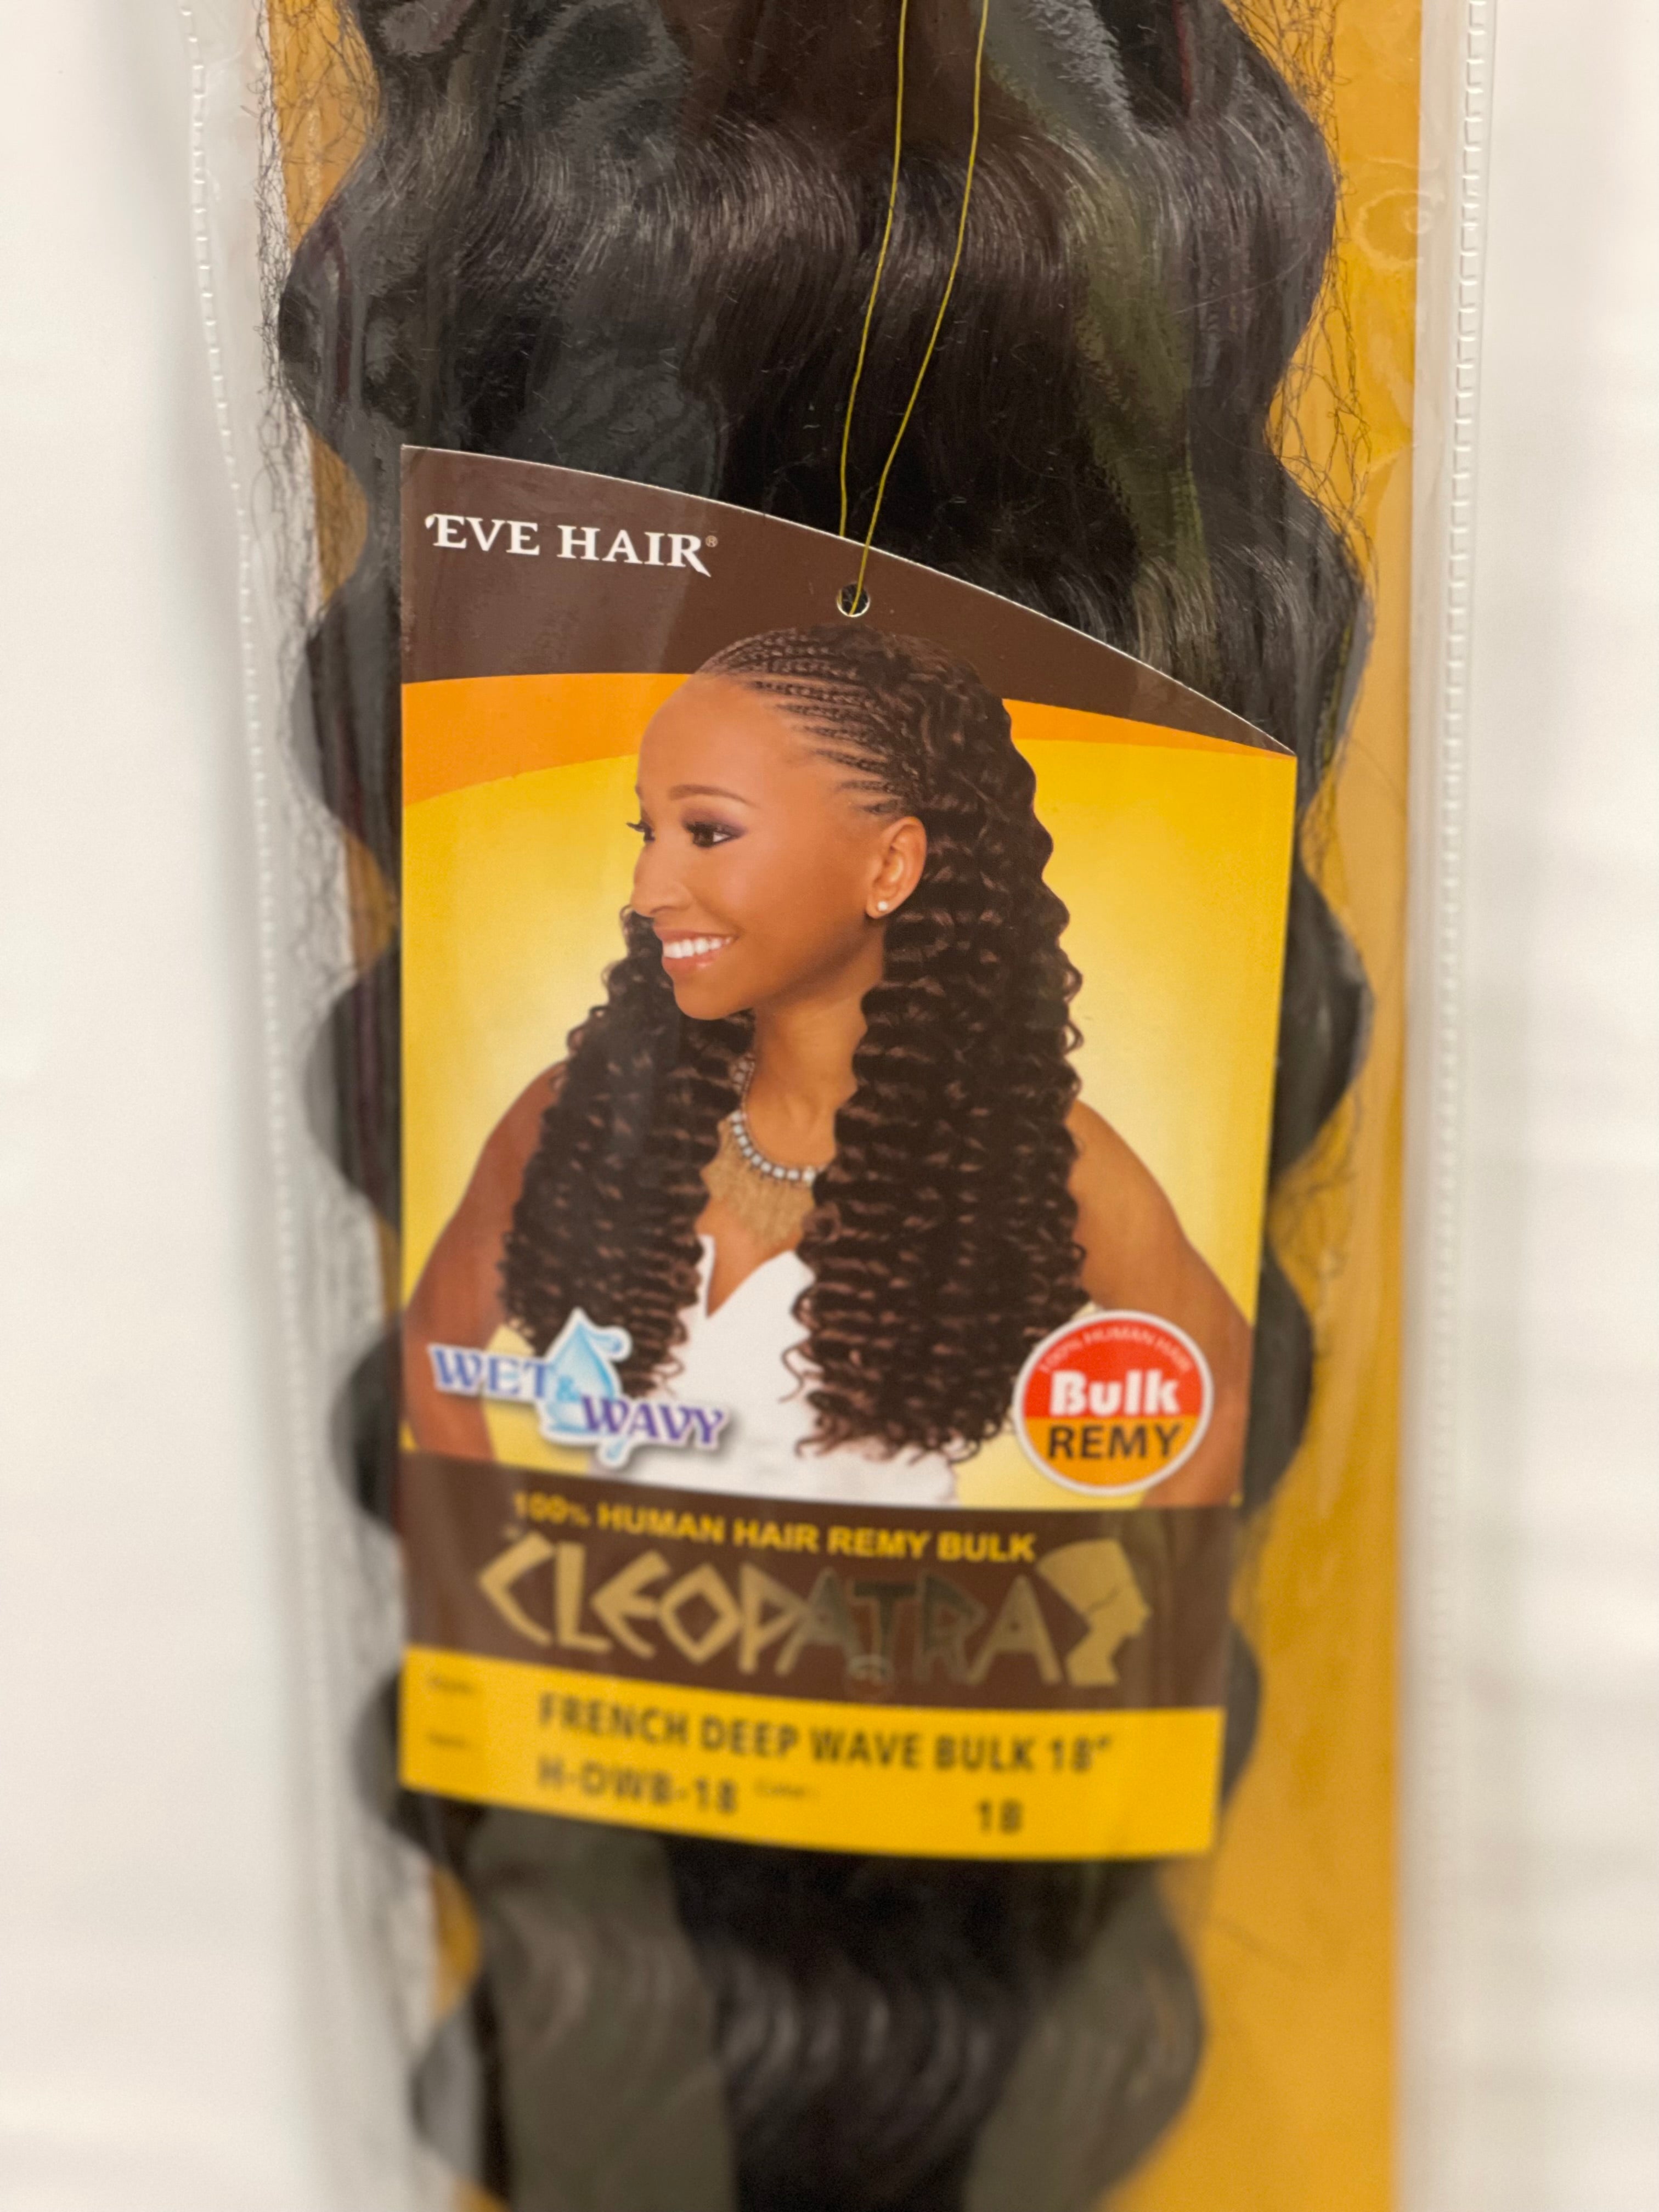 100% Human Hair for Braiding by Janet Collection, Wet & Wavy 2